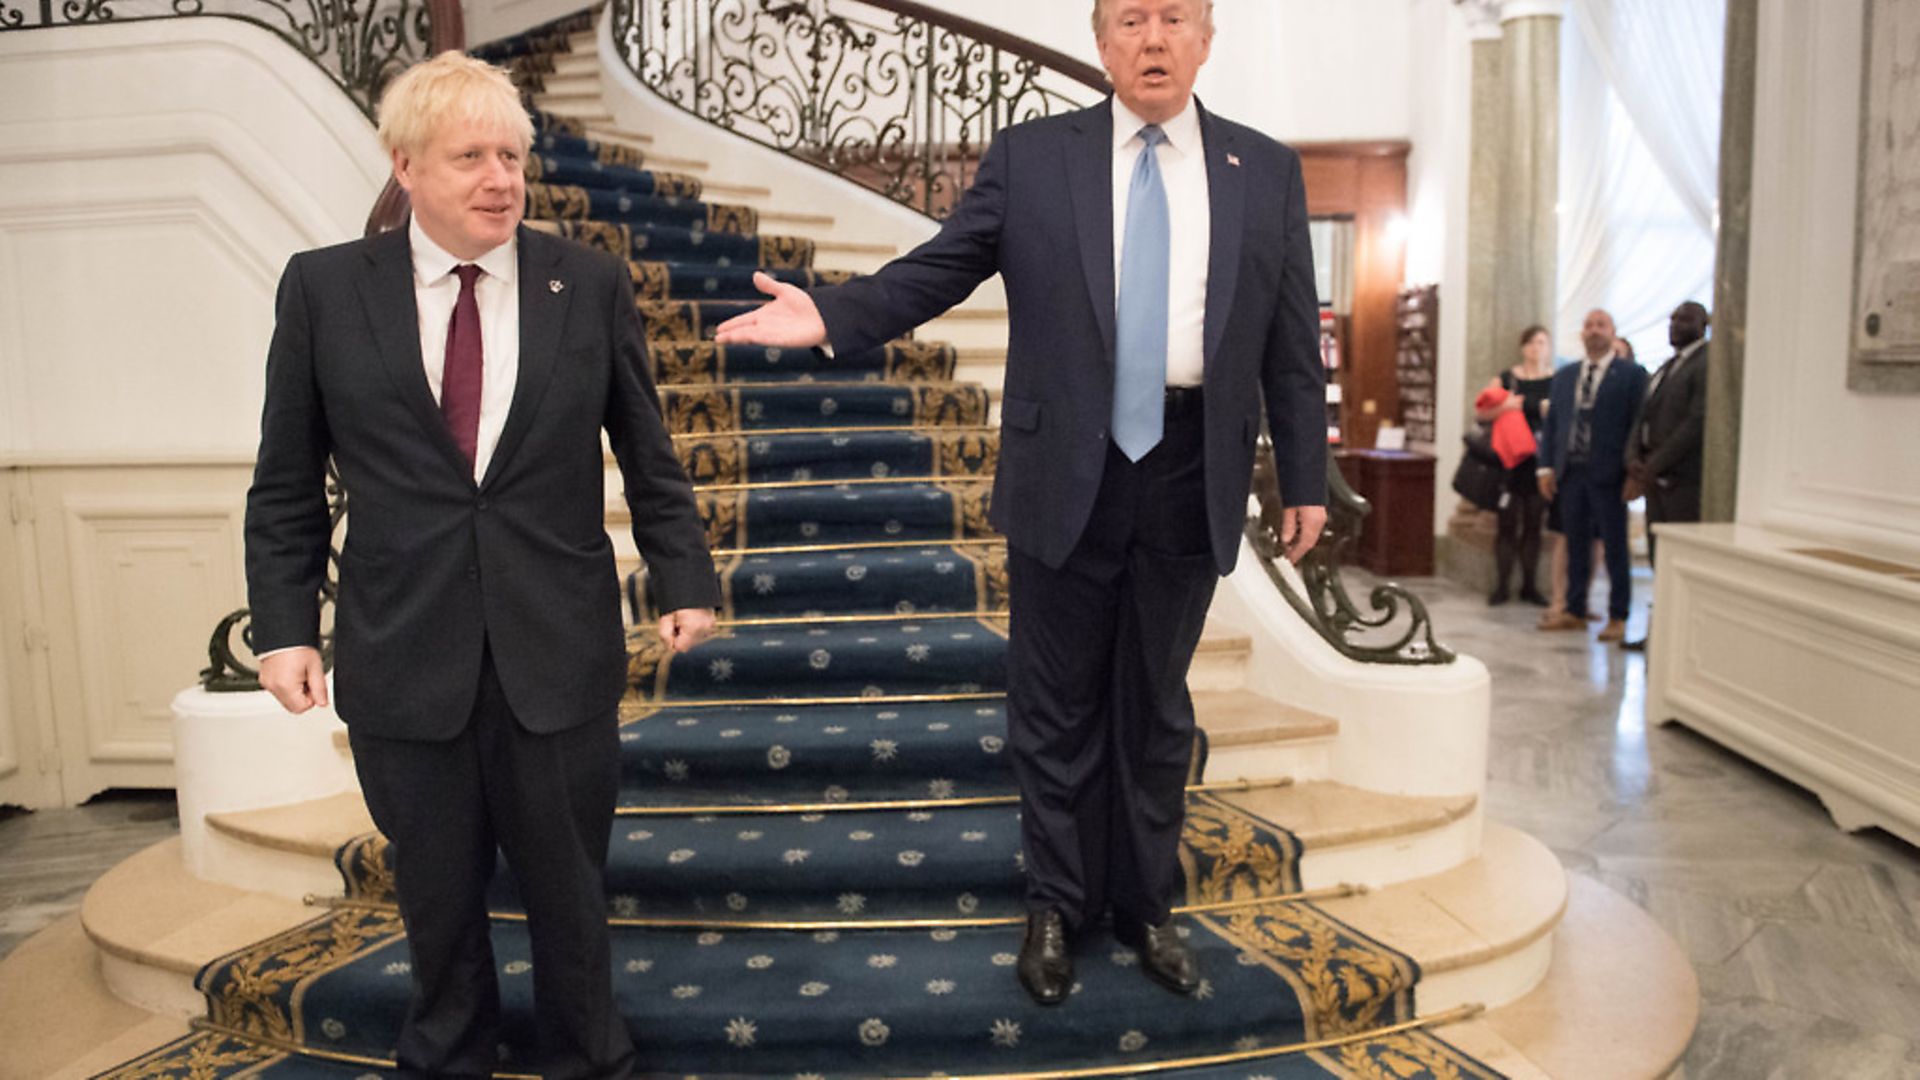 Boris Johnson meeting US President Donald Trump for bilateral talks during the G7 summit in Biarritz, France. Picture: Stefan Rousseau/PA Wire/PA Images - Credit: PA Wire/PA Images